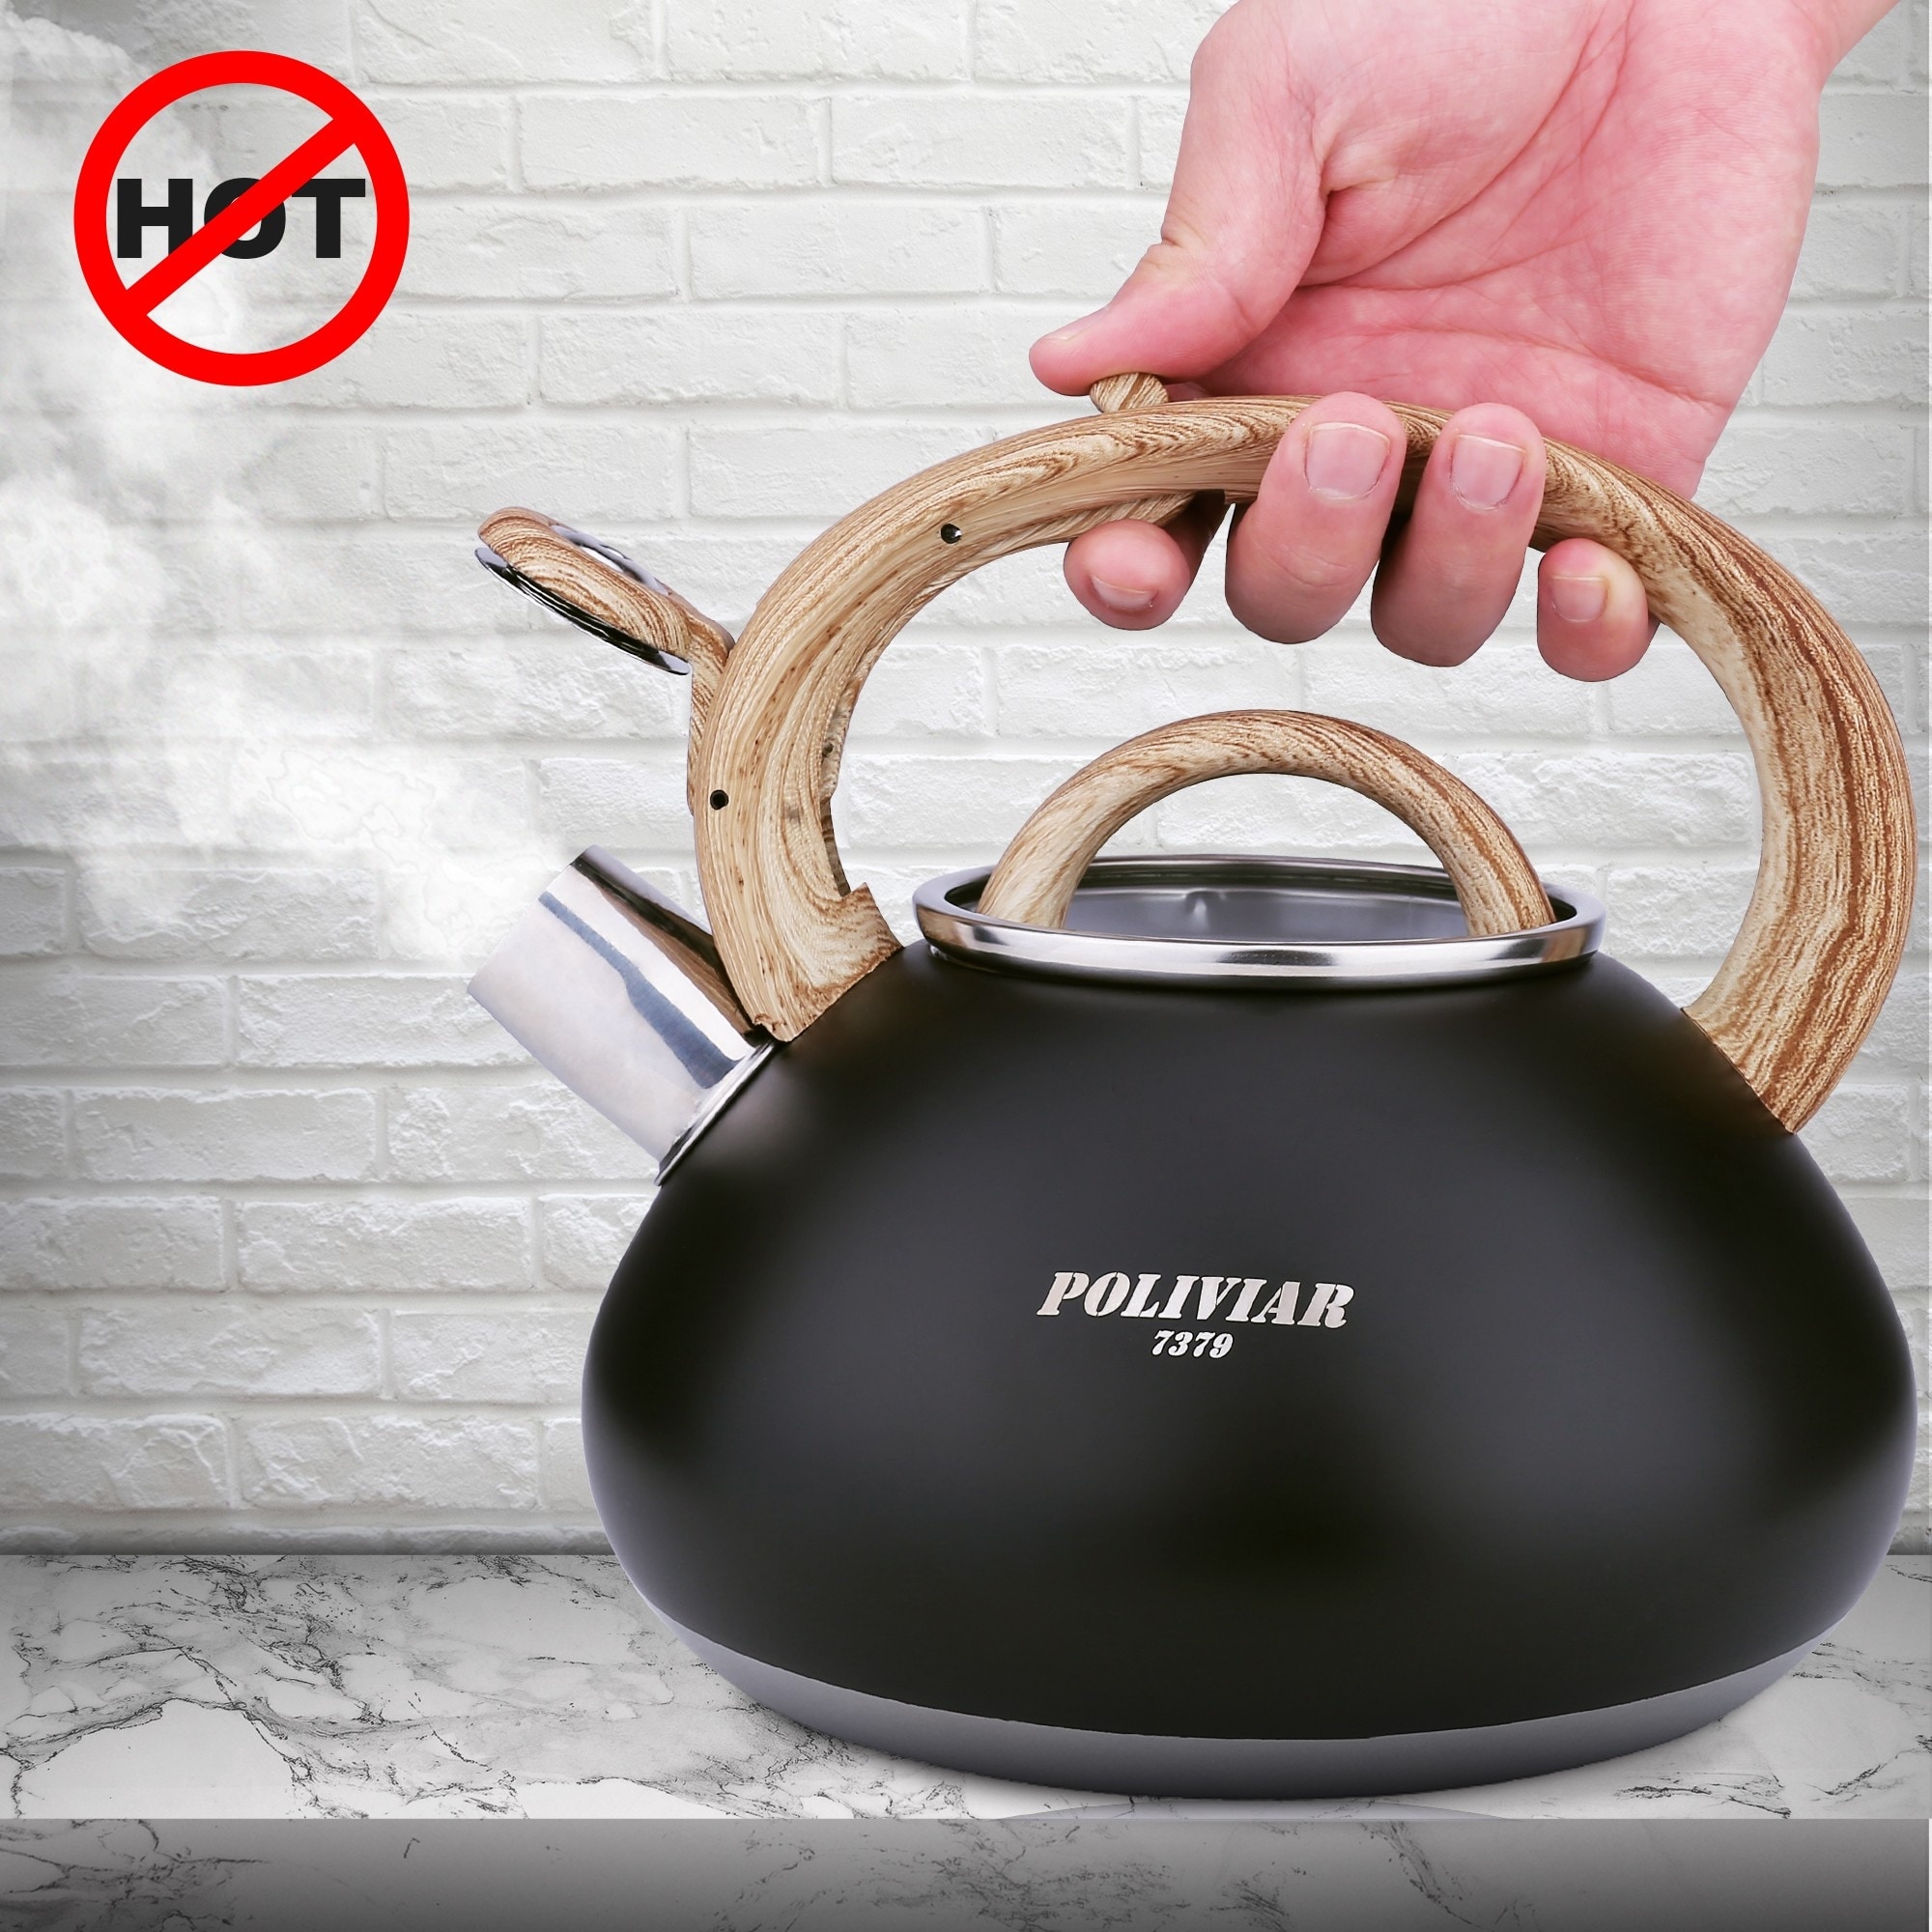 https://ak1.ostkcdn.com/images/products/is/images/direct/43e681c5f665433b1666c25d5d5011961fba0008/Poliviar-Tea-Kettle-2.1-qt.-Whistling-Food-Grade-Stainless-Steel-Stove.jpg